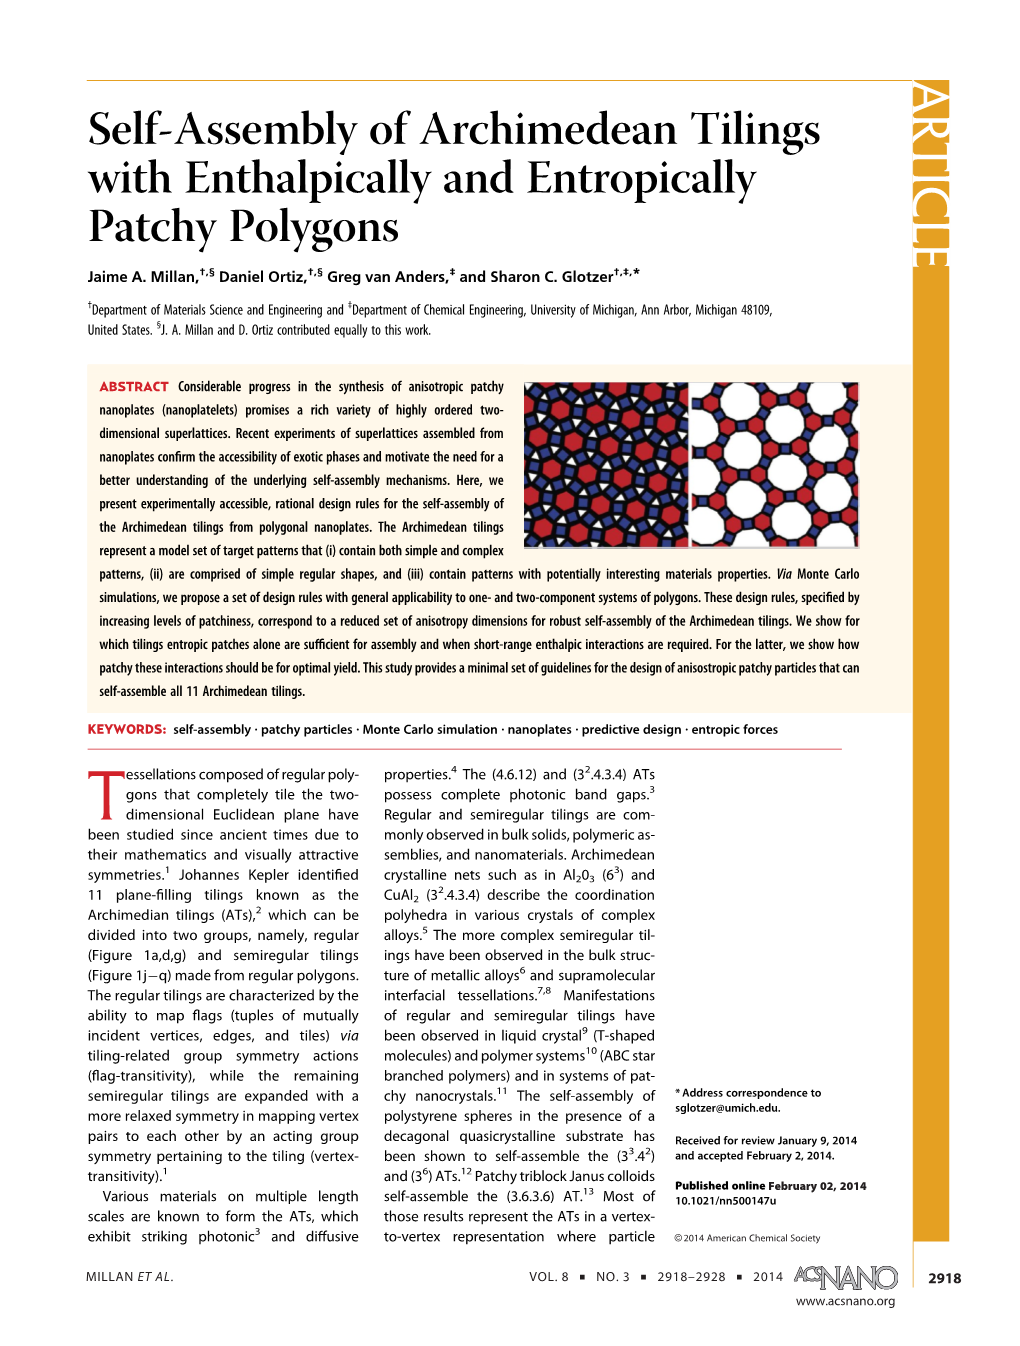 ARTICLE Self-Assembly of Archimedean Tilings with Enthalpically and Entropically Patchy Polygons